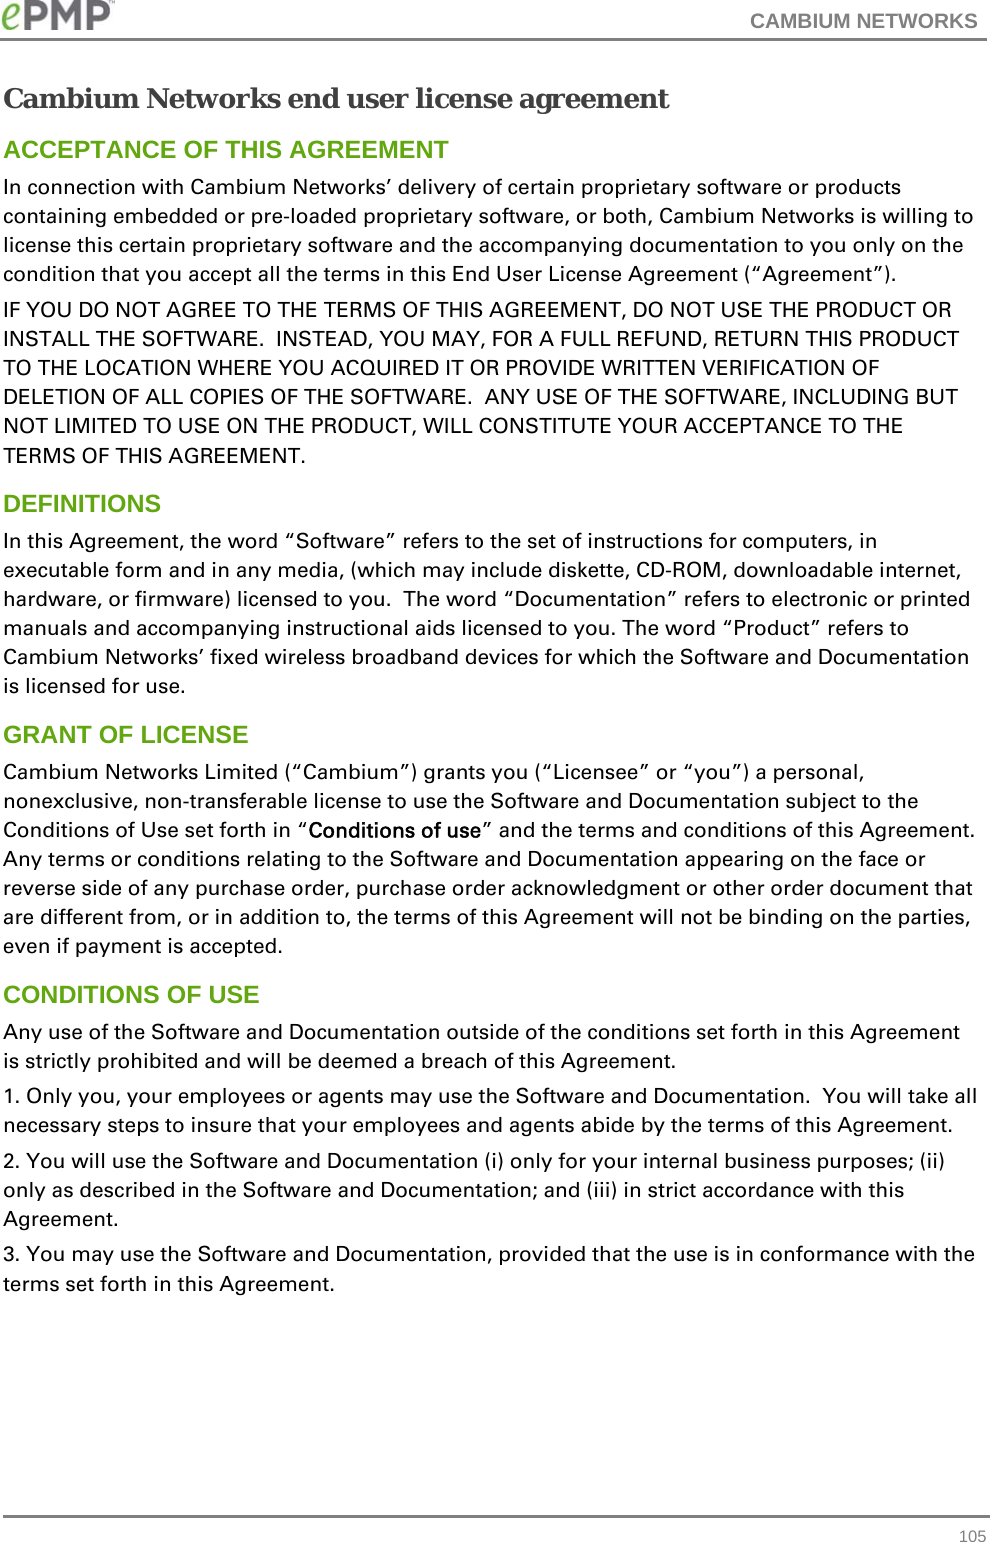 CAMBIUM NETWORKS   105Cambium Networks end user license agreement ACCEPTANCE OF THIS AGREEMENT In connection with Cambium Networks’ delivery of certain proprietary software or products containing embedded or pre-loaded proprietary software, or both, Cambium Networks is willing to license this certain proprietary software and the accompanying documentation to you only on the condition that you accept all the terms in this End User License Agreement (“Agreement”). IF YOU DO NOT AGREE TO THE TERMS OF THIS AGREEMENT, DO NOT USE THE PRODUCT OR INSTALL THE SOFTWARE.  INSTEAD, YOU MAY, FOR A FULL REFUND, RETURN THIS PRODUCT TO THE LOCATION WHERE YOU ACQUIRED IT OR PROVIDE WRITTEN VERIFICATION OF DELETION OF ALL COPIES OF THE SOFTWARE.  ANY USE OF THE SOFTWARE, INCLUDING BUT NOT LIMITED TO USE ON THE PRODUCT, WILL CONSTITUTE YOUR ACCEPTANCE TO THE TERMS OF THIS AGREEMENT.  DEFINITIONS In this Agreement, the word “Software” refers to the set of instructions for computers, in executable form and in any media, (which may include diskette, CD-ROM, downloadable internet, hardware, or firmware) licensed to you.  The word “Documentation” refers to electronic or printed manuals and accompanying instructional aids licensed to you. The word “Product” refers to Cambium Networks’ fixed wireless broadband devices for which the Software and Documentation is licensed for use. GRANT OF LICENSE Cambium Networks Limited (“Cambium”) grants you (“Licensee” or “you”) a personal, nonexclusive, non-transferable license to use the Software and Documentation subject to the Conditions of Use set forth in “Conditions of use” and the terms and conditions of this Agreement.  Any terms or conditions relating to the Software and Documentation appearing on the face or reverse side of any purchase order, purchase order acknowledgment or other order document that are different from, or in addition to, the terms of this Agreement will not be binding on the parties, even if payment is accepted. CONDITIONS OF USE Any use of the Software and Documentation outside of the conditions set forth in this Agreement is strictly prohibited and will be deemed a breach of this Agreement.  1. Only you, your employees or agents may use the Software and Documentation.  You will take all necessary steps to insure that your employees and agents abide by the terms of this Agreement. 2. You will use the Software and Documentation (i) only for your internal business purposes; (ii) only as described in the Software and Documentation; and (iii) in strict accordance with this Agreement. 3. You may use the Software and Documentation, provided that the use is in conformance with the terms set forth in this Agreement.    